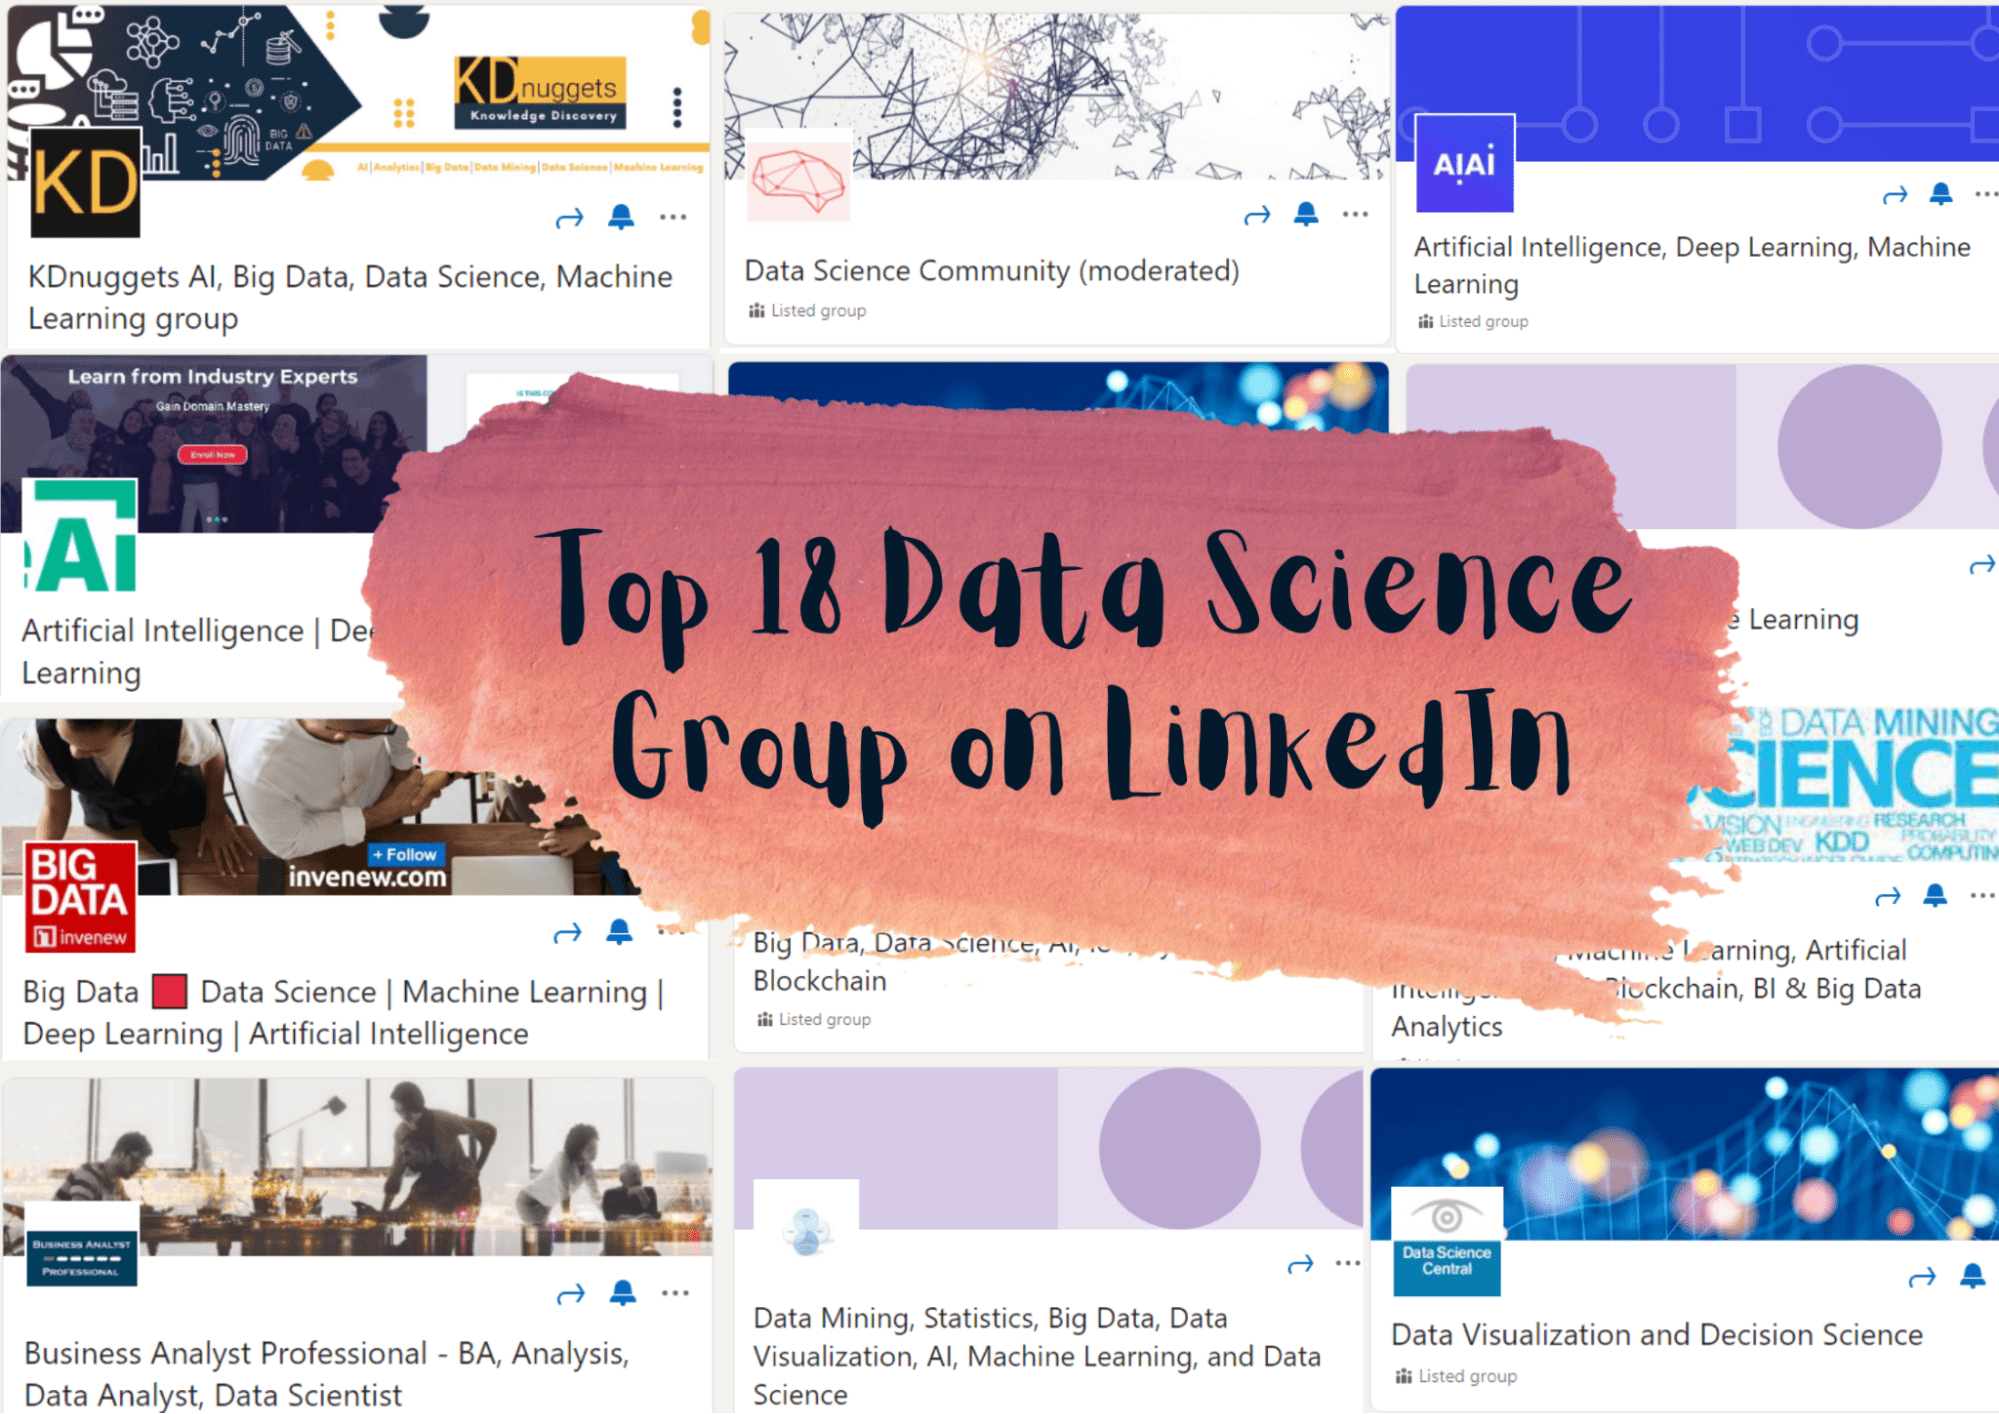 Top 18 Data Science Group on LinkedIn